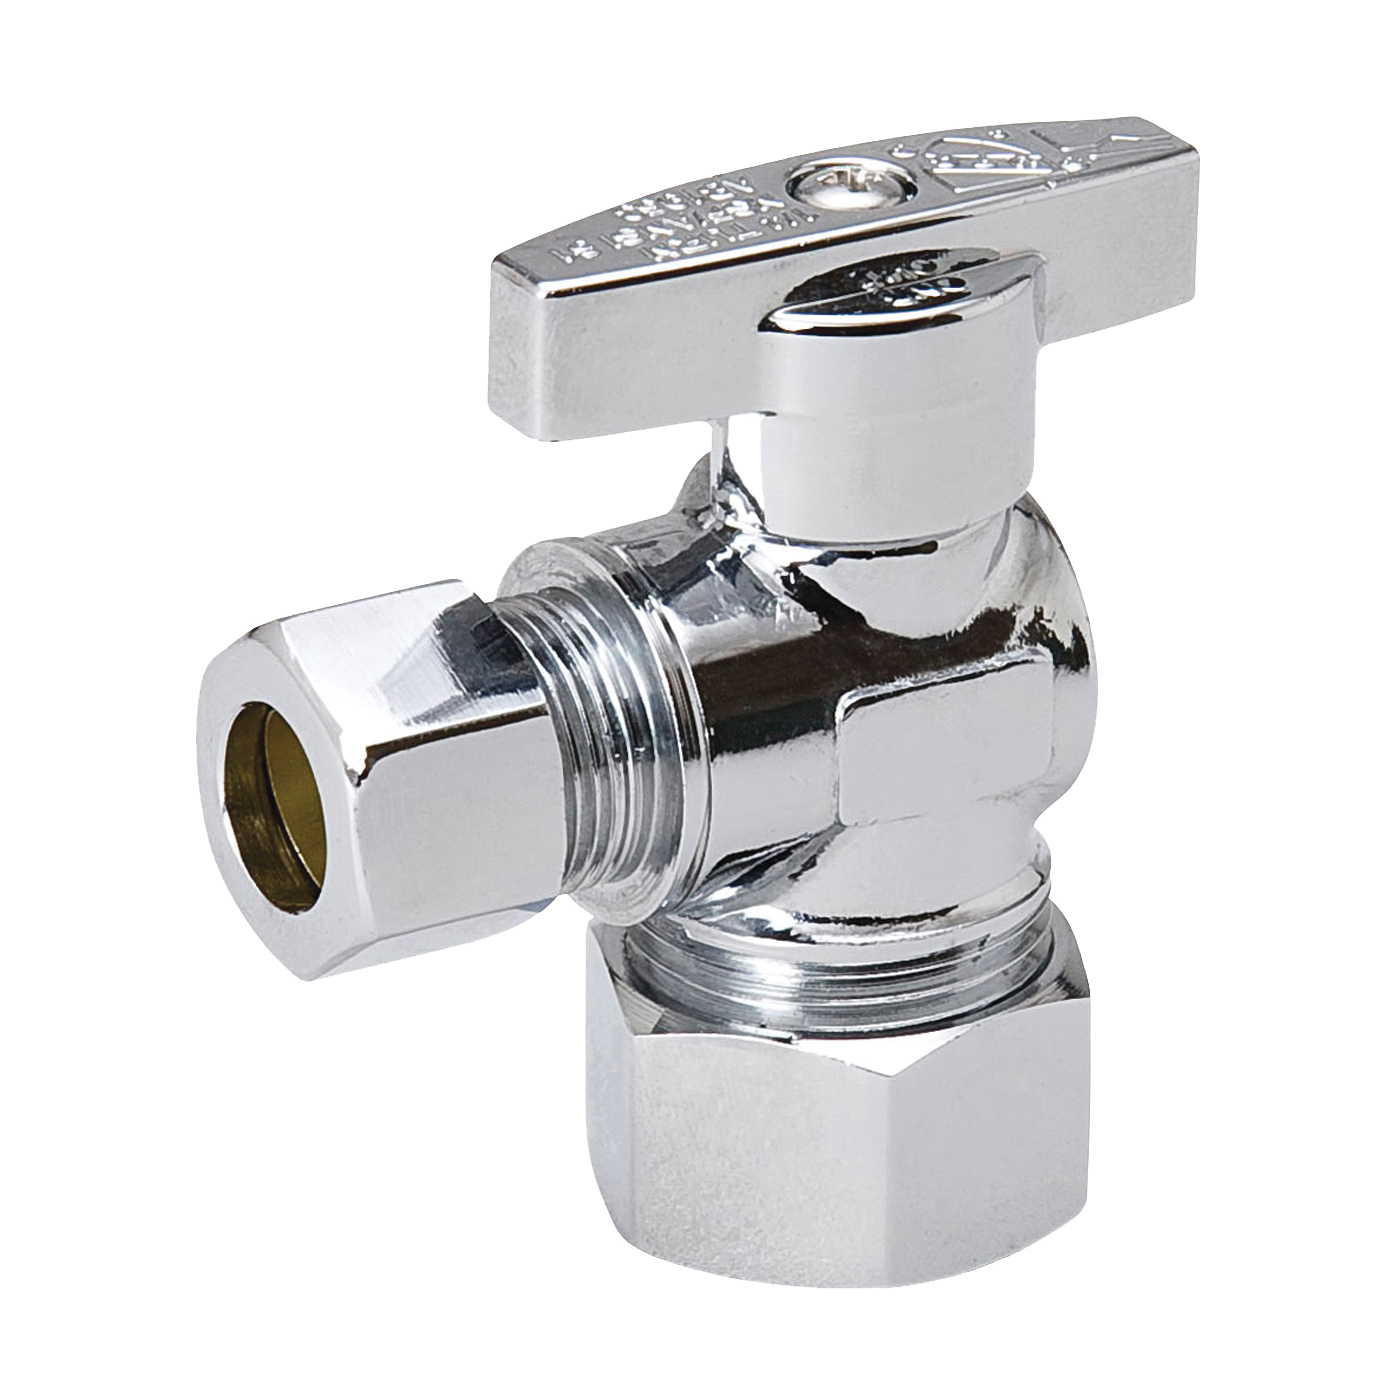 190-032HC Stop Valve, 5/8 x 3/8 in Connection, Compression, 125 psi Pressure, Brass Body